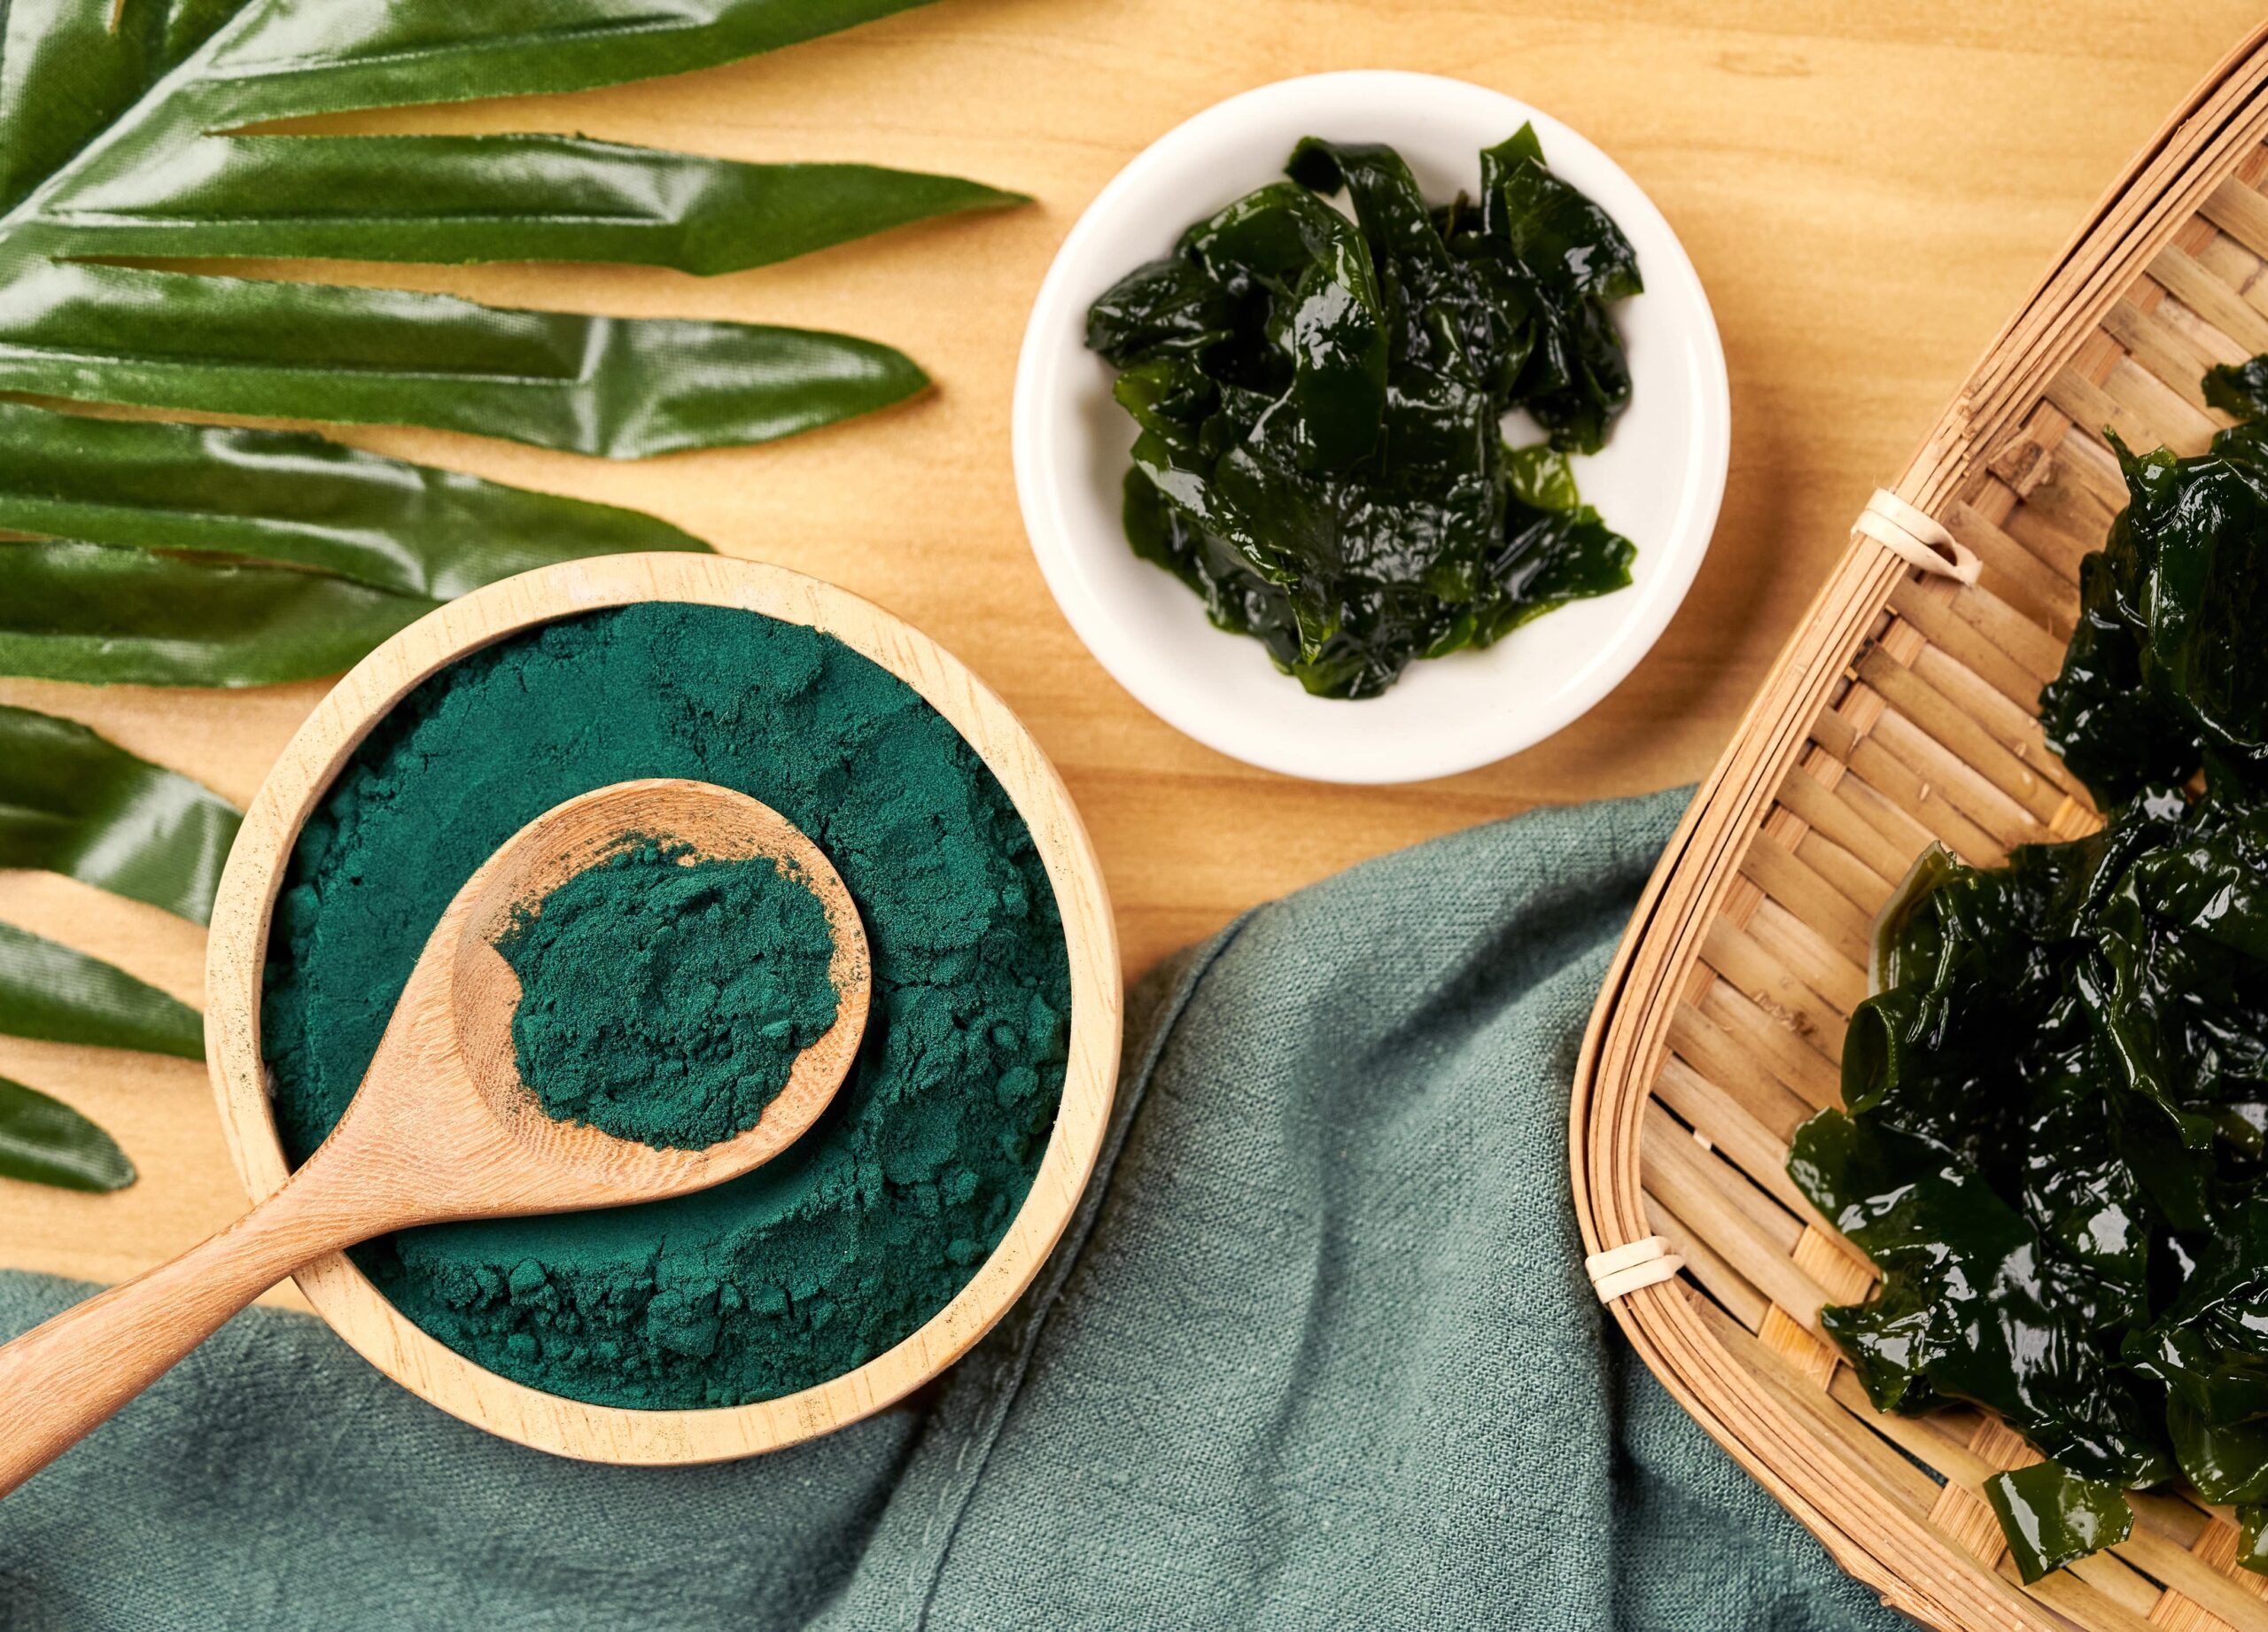 A IMAGES FOR COMPLETION_SPIRULINA CHOICE 2_stock-photo-top-view-laminaria-or-kelp-seaweed-and-spirulina-powder-in-wood-bowl-and-spoon-background-flat-lay-2036479103-min